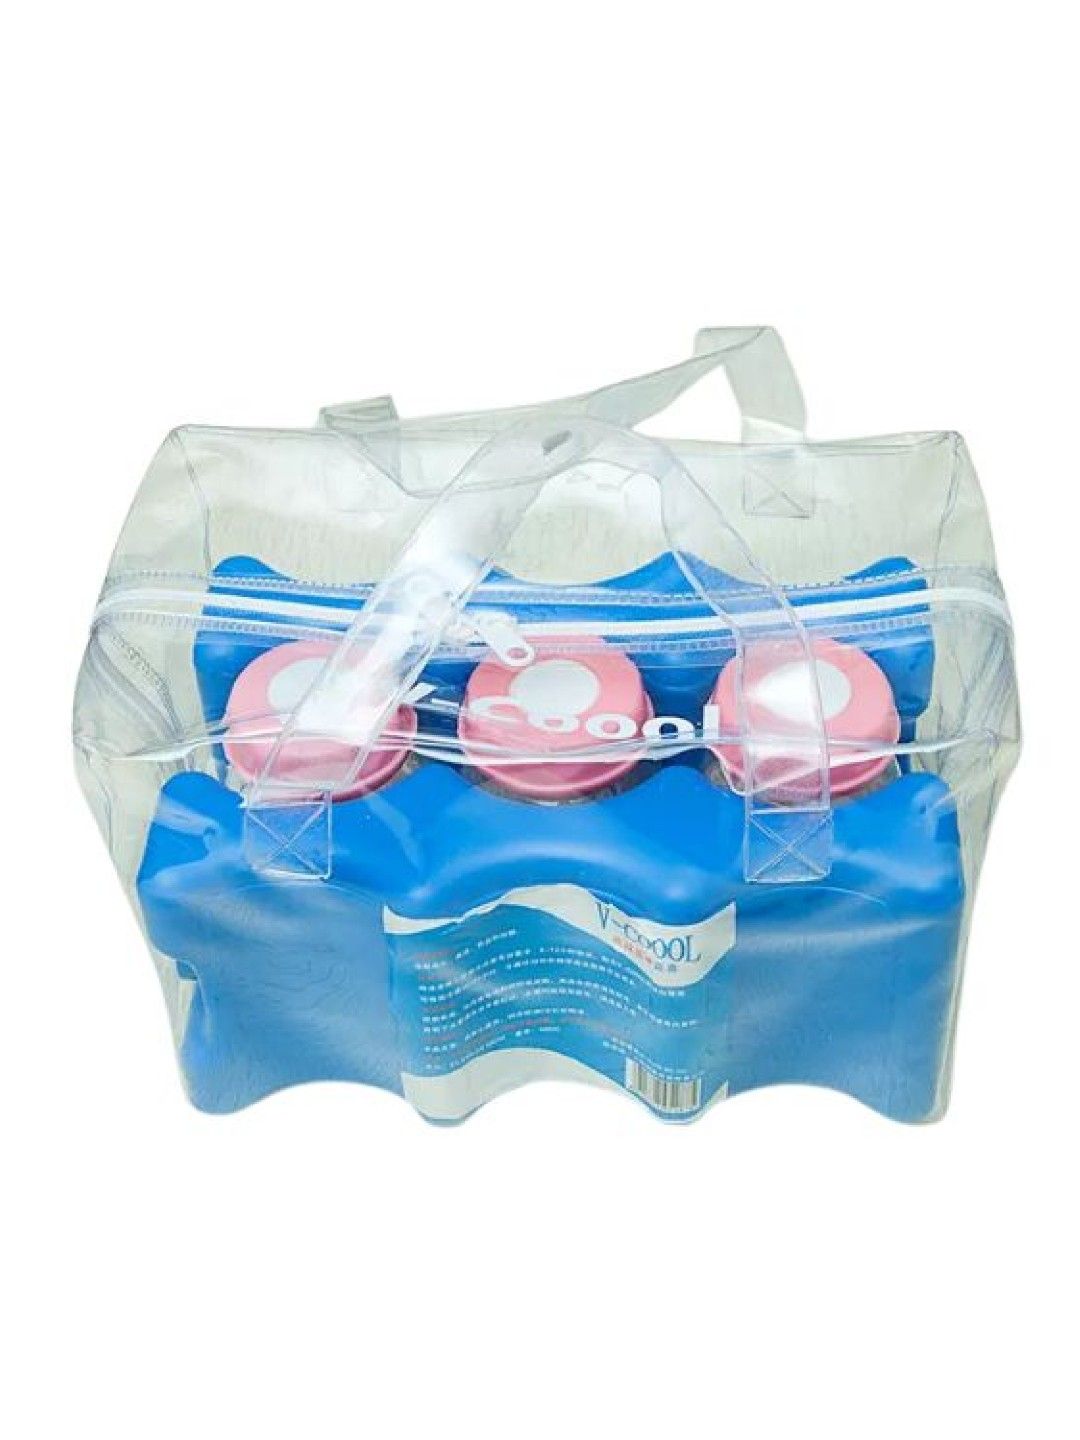 V-coool Transparent Clear PVC Waterproof Zipper Bag with Ice Bricks